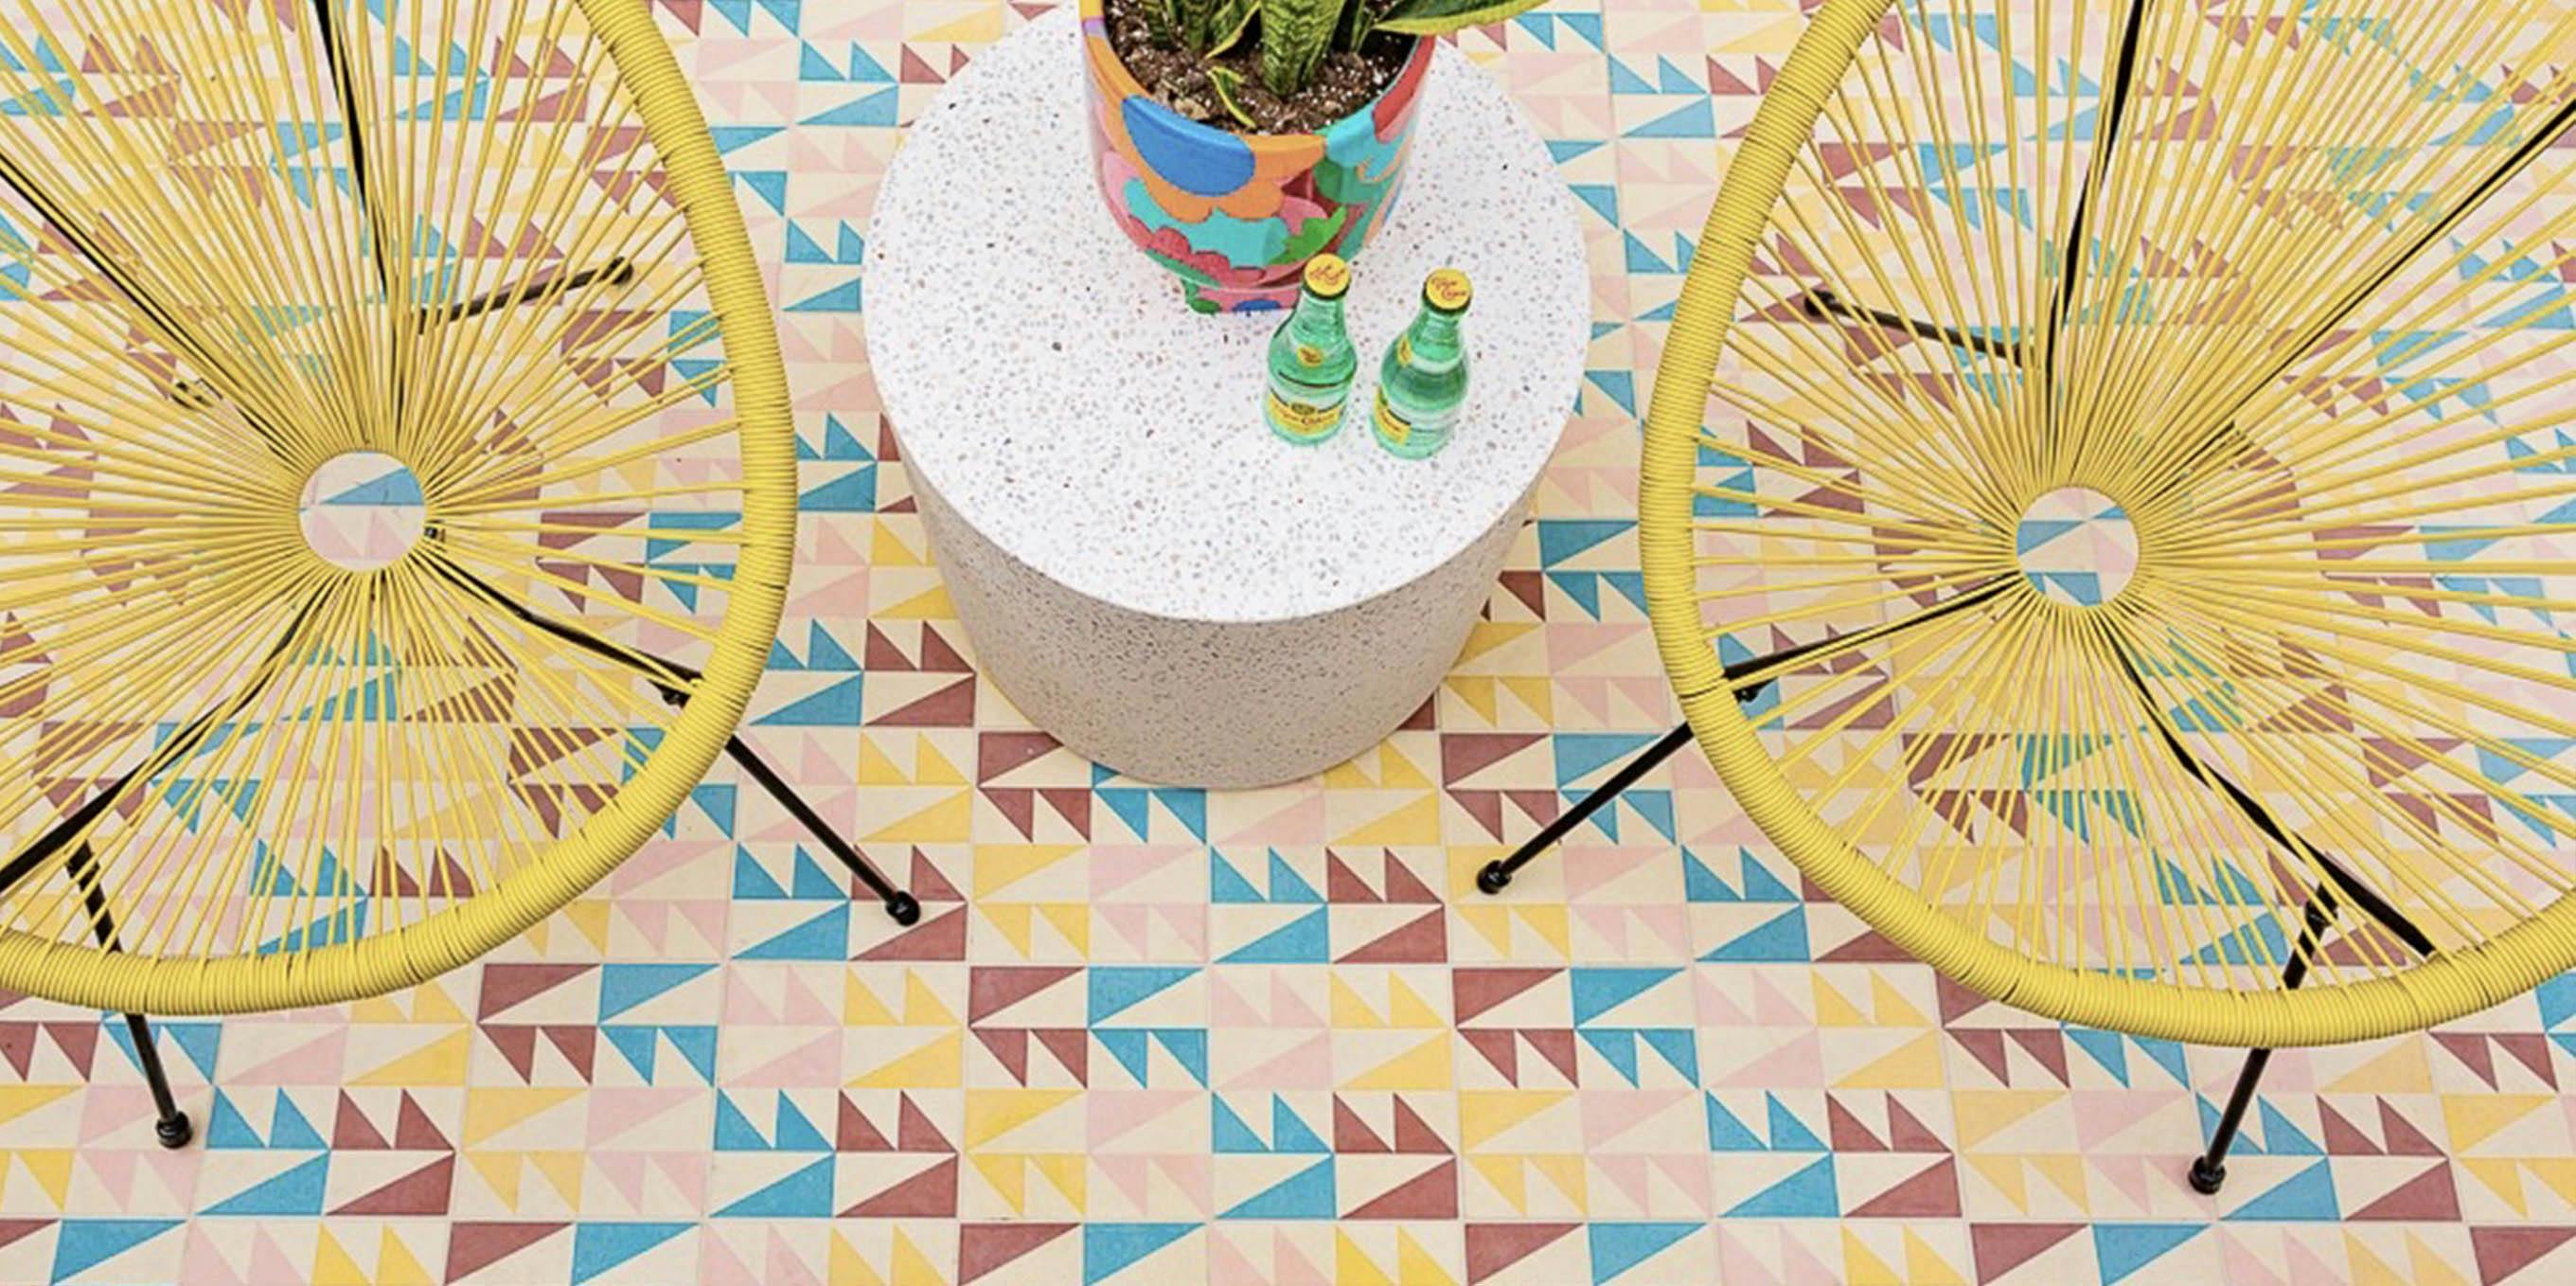 Cement Tile: Square Patterned collection featured image.